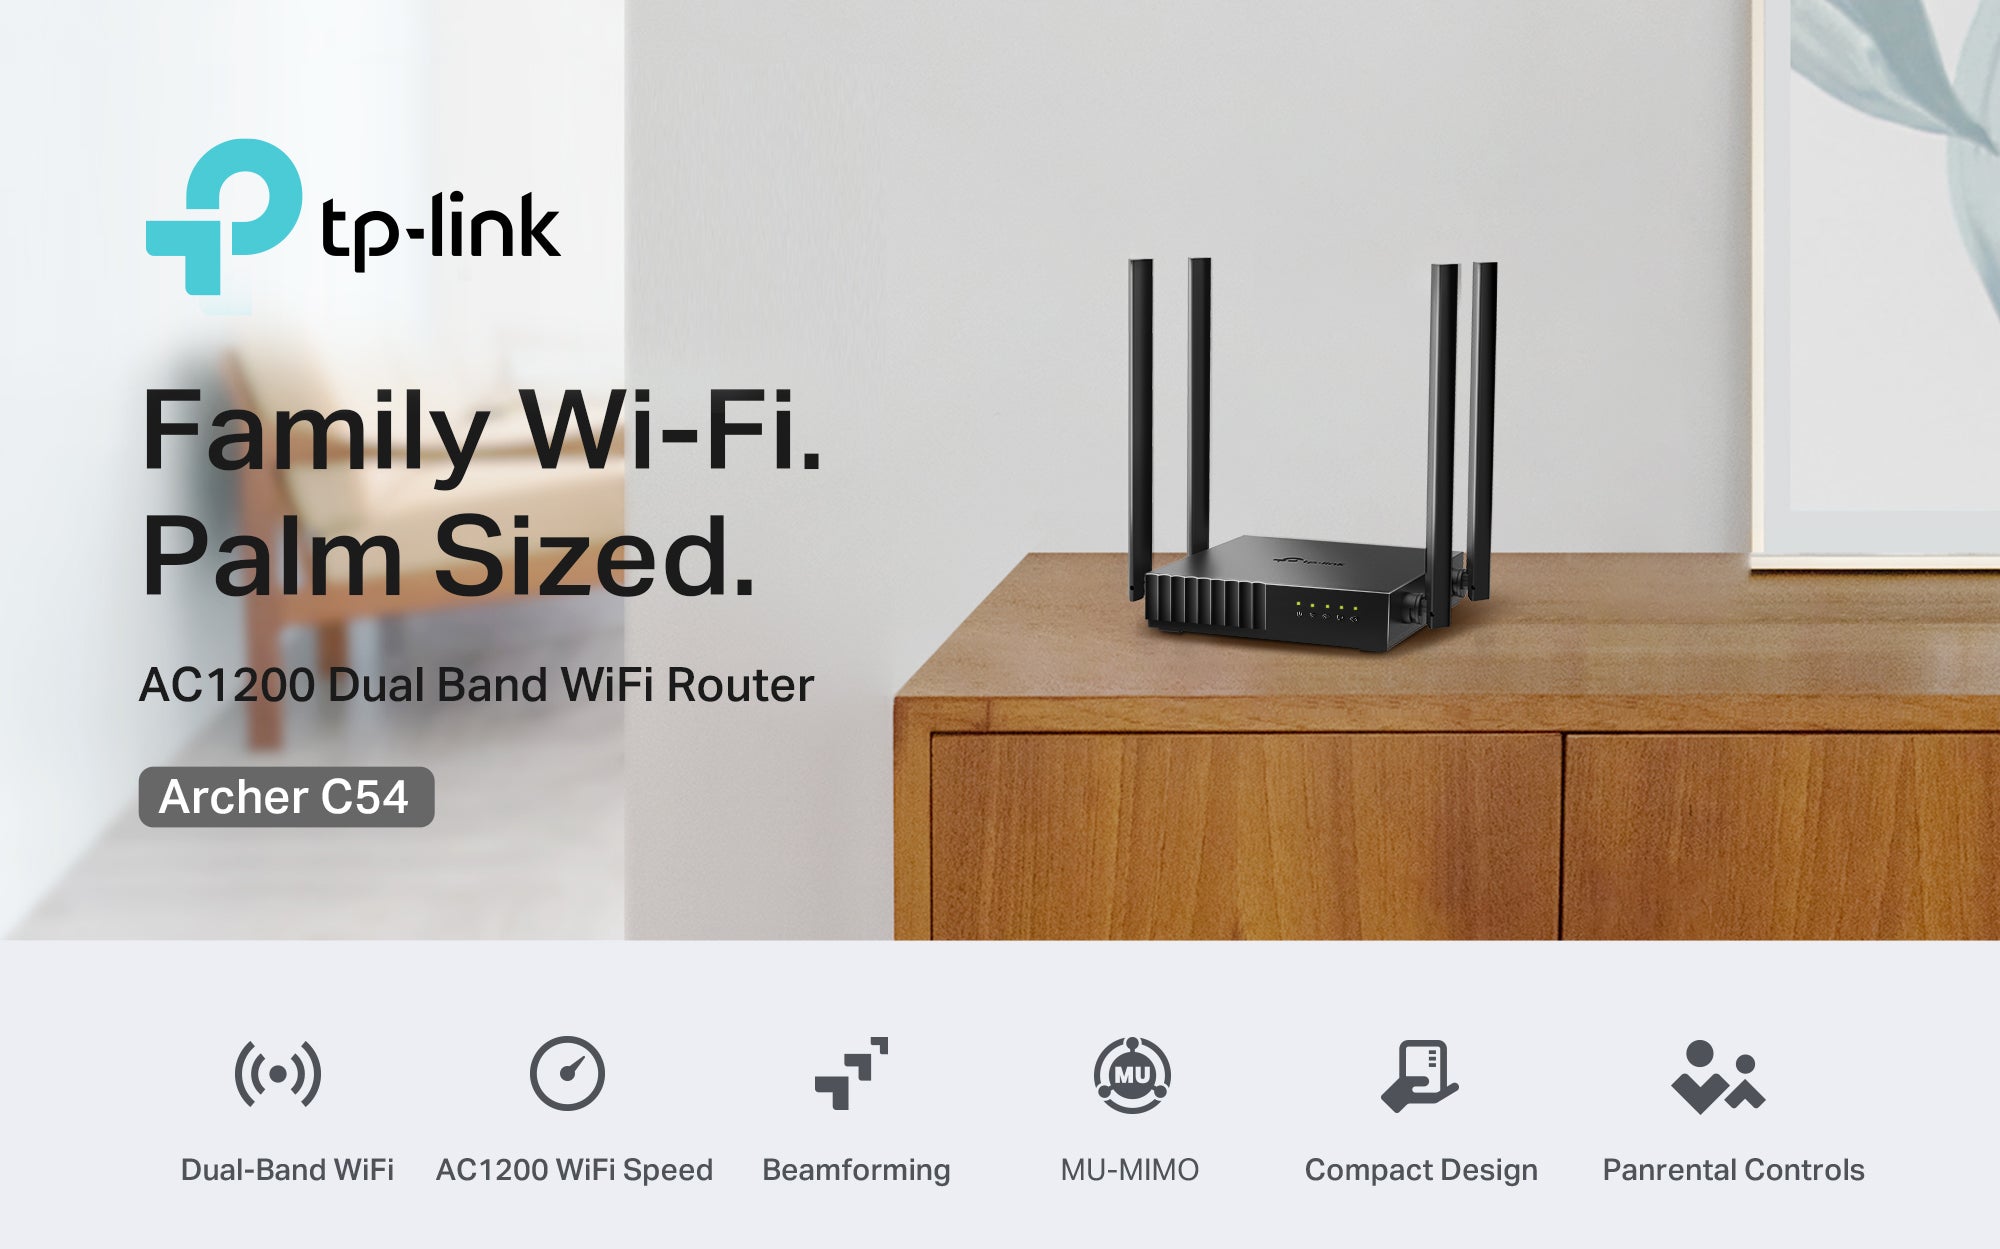  TP-Link Archer C54, AC1200 MU-MIMO Dual-Band WiFi Router